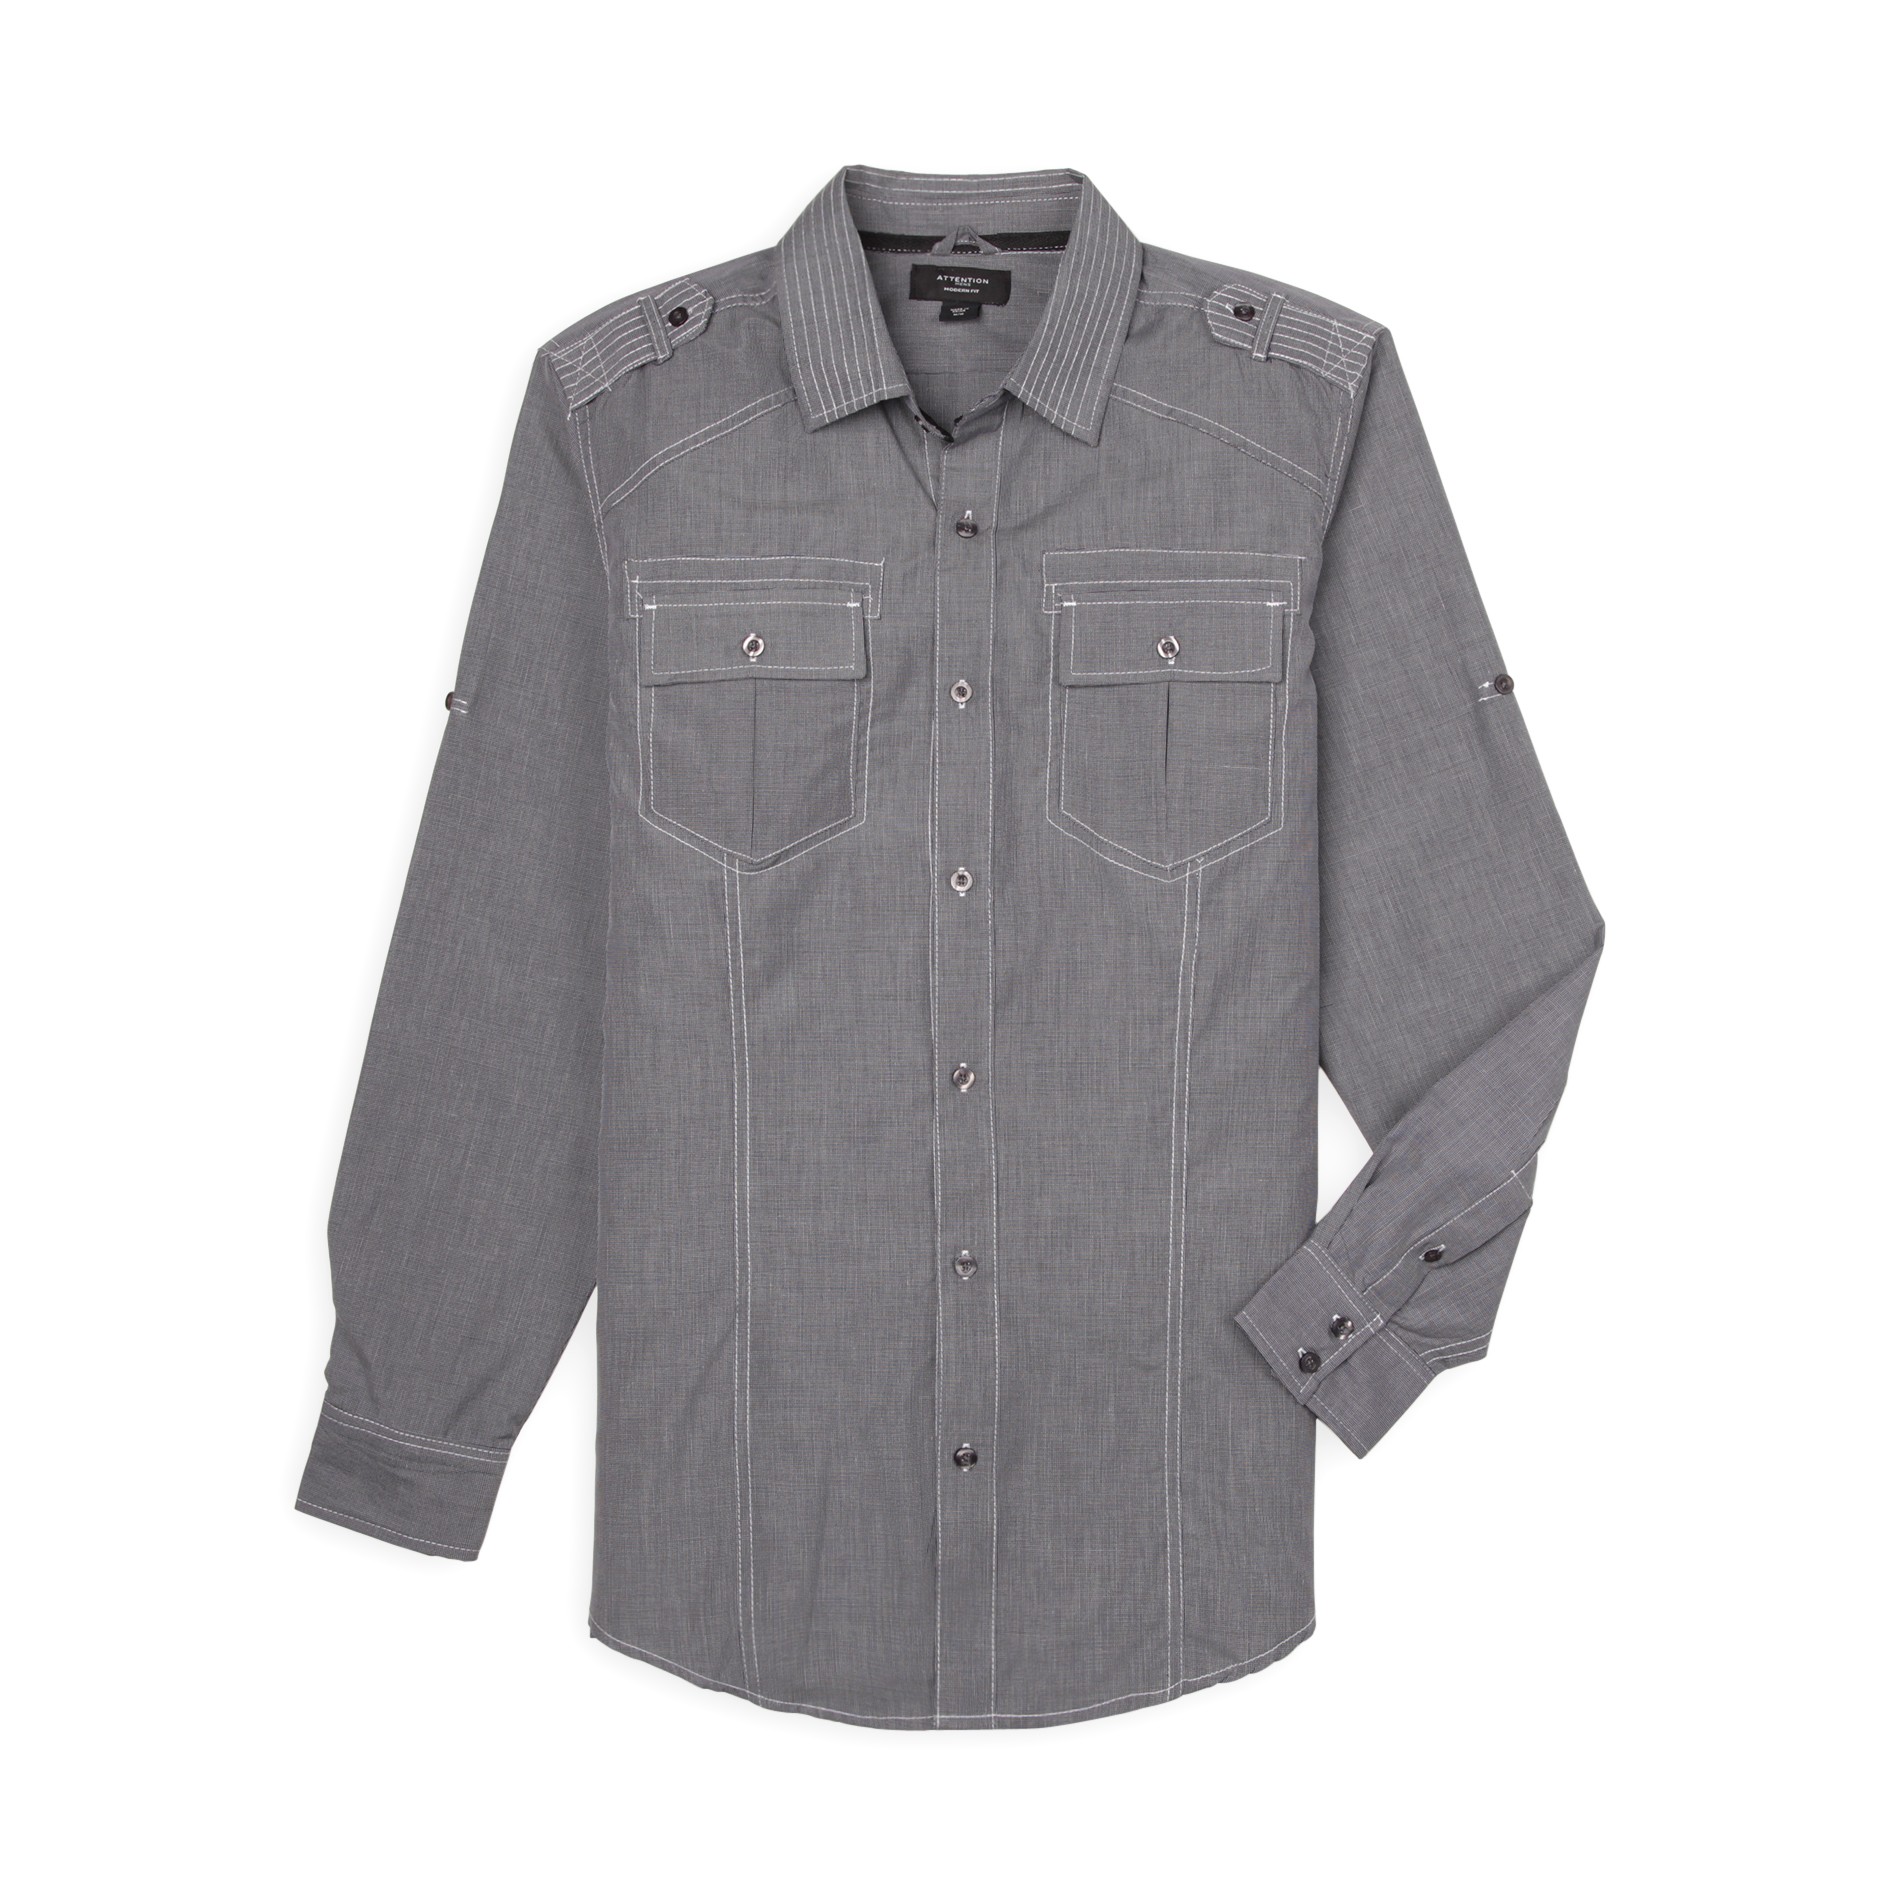 Attention Men's Long-Sleeve Button-Front Shirt